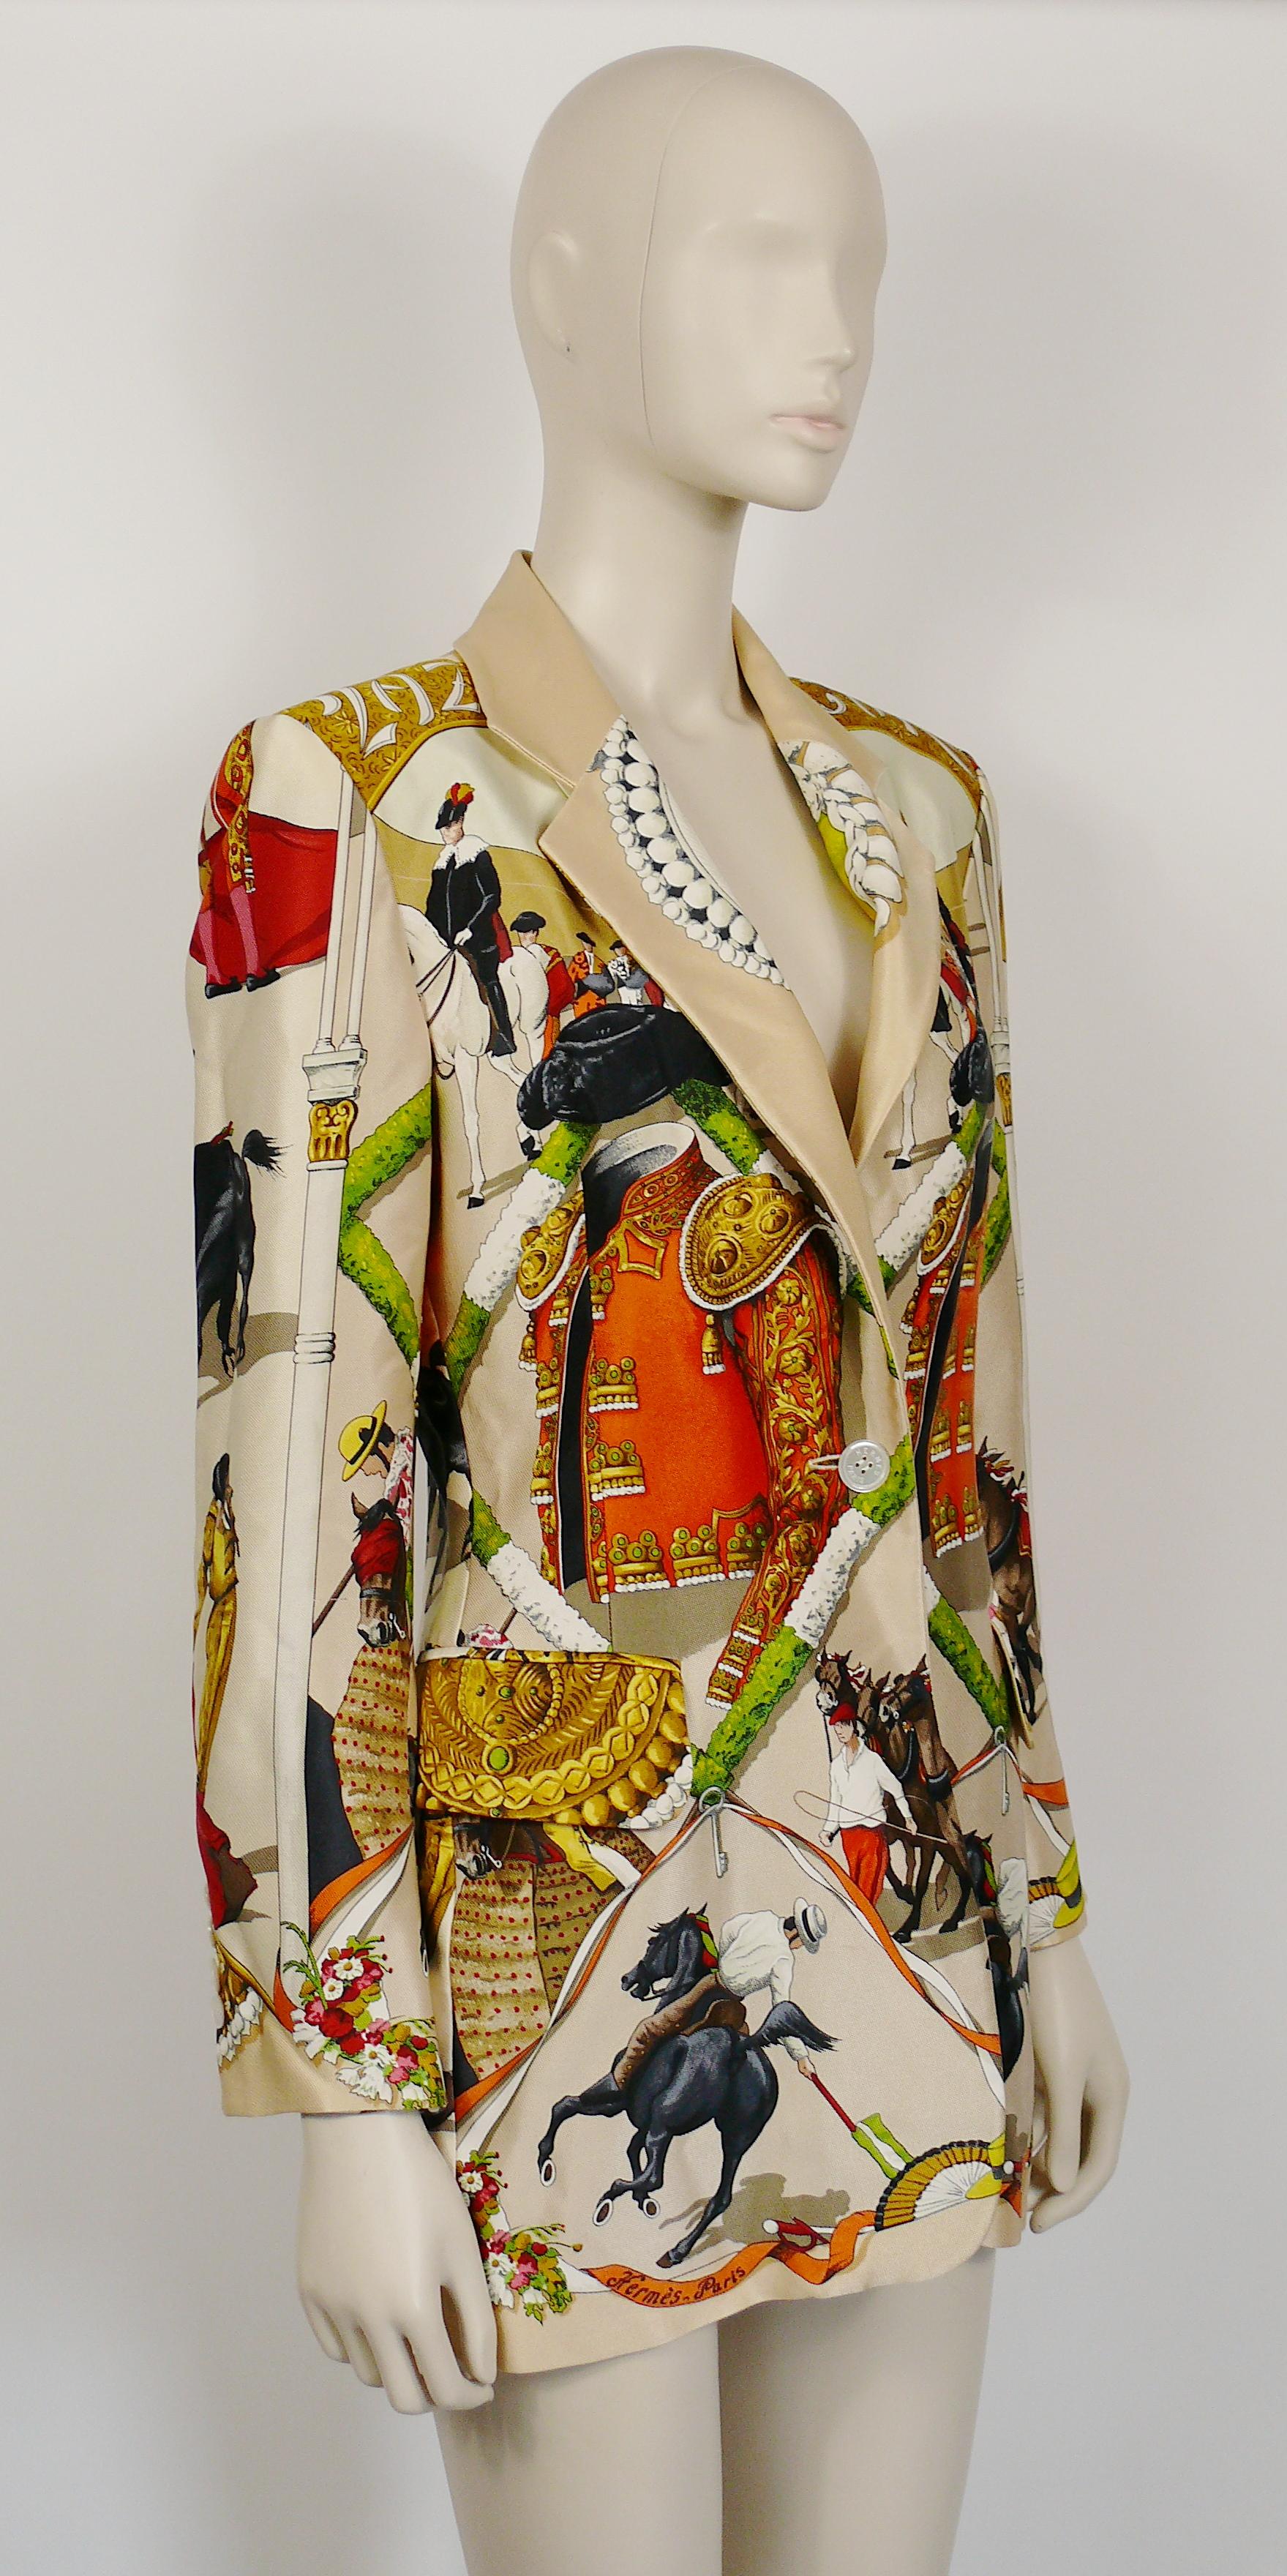 HERMES vintage rare PLAZA DE TOROS jacket designed by HUBERT DE WATRIGANT, featuring matador and bull print.

Similar model (in a different colorway) worn by supermodel CHRISTIE TURLINGTON - HERMES Ready-to-Wear Fall/Winter 1992.

This jacket